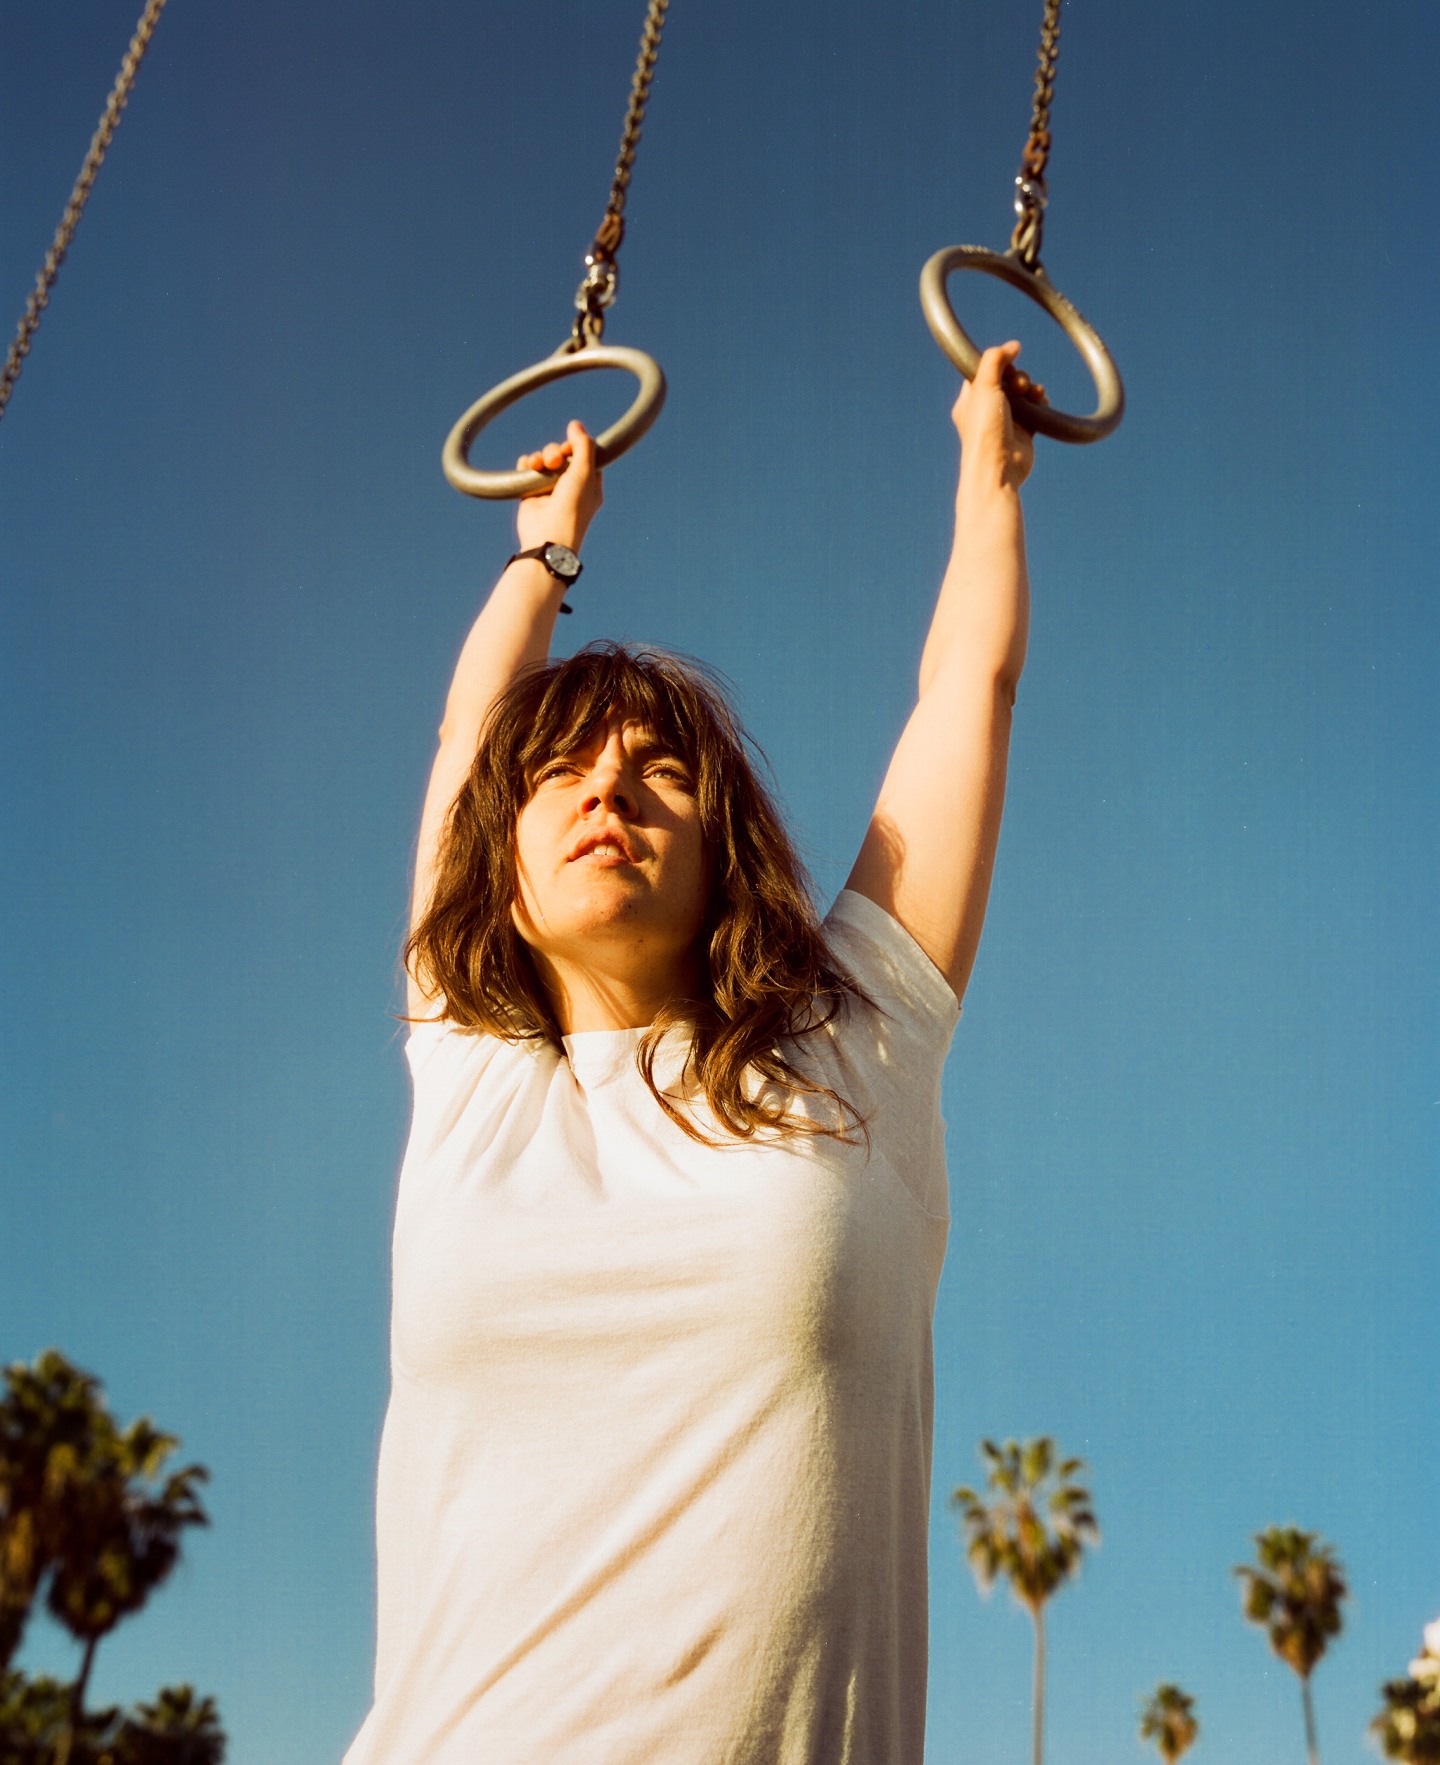 Courtney Barnett is still one of the cleverest rock writers around